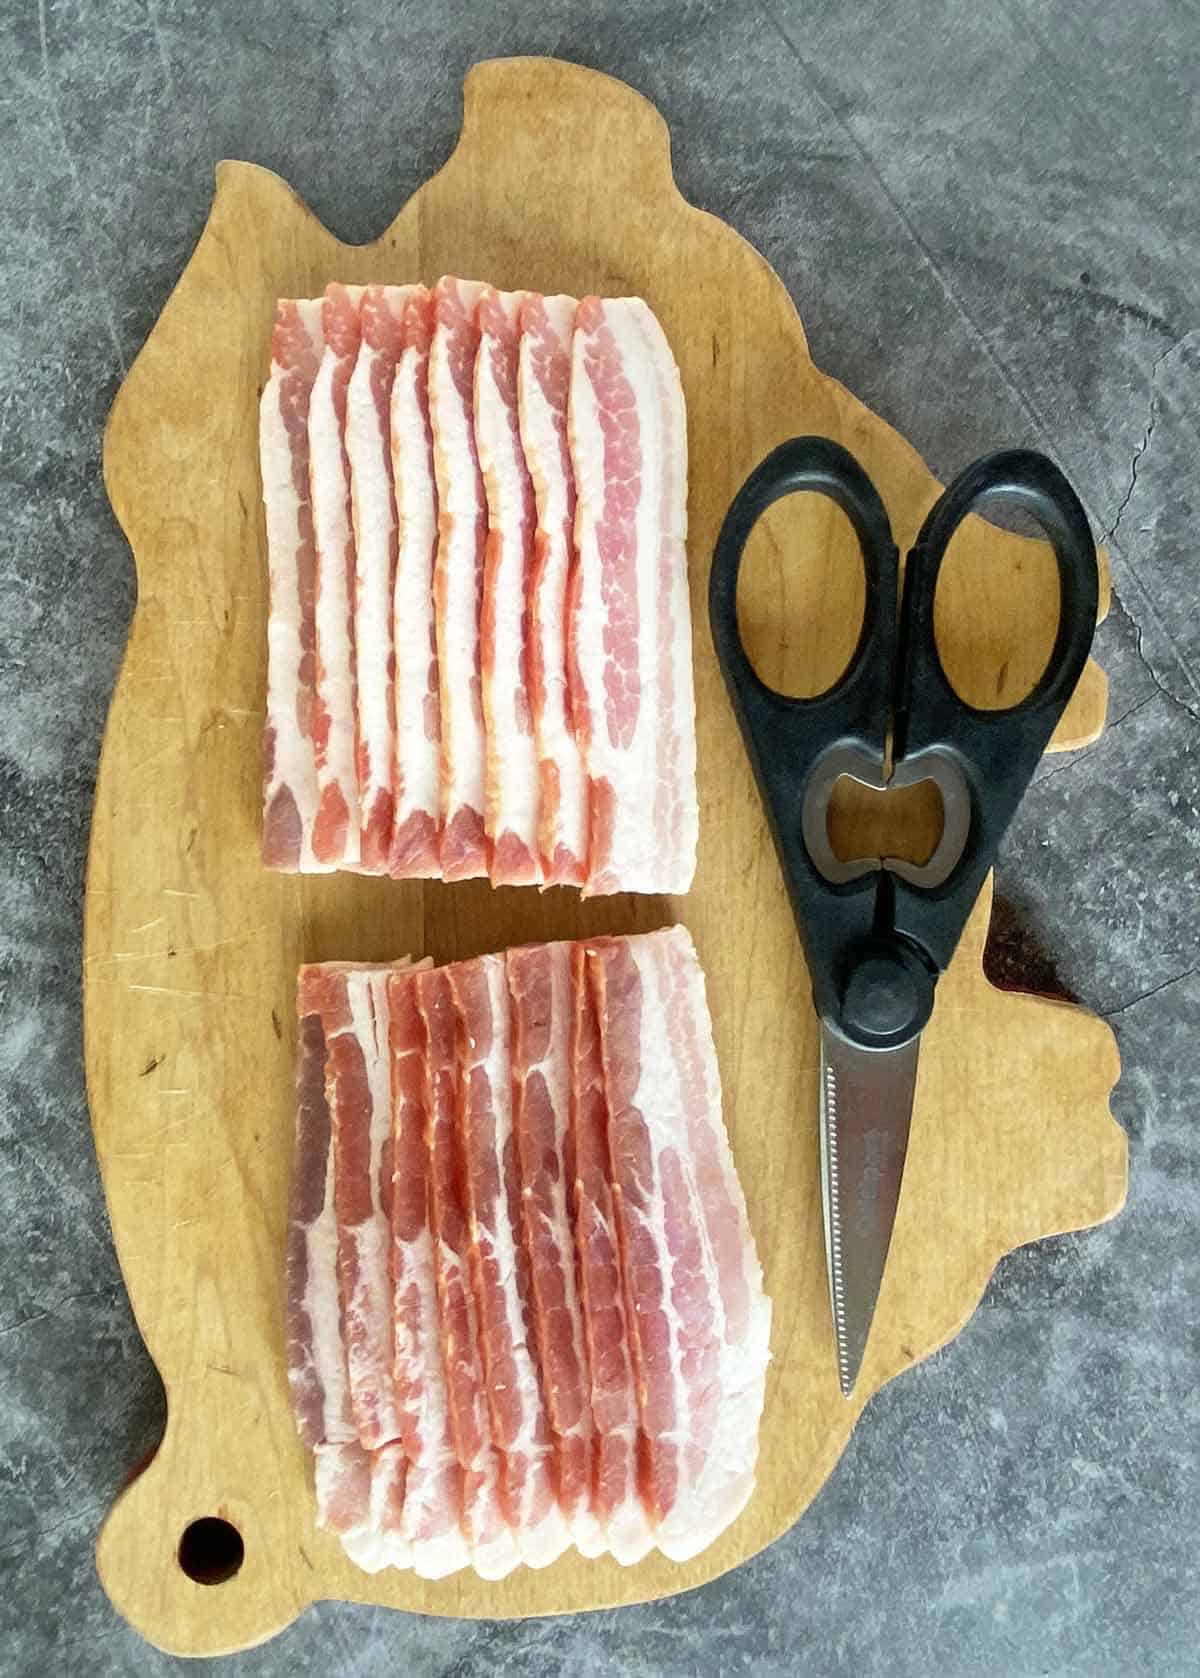 A cutting board with a pound of bacon and a pair of kitchen shears.